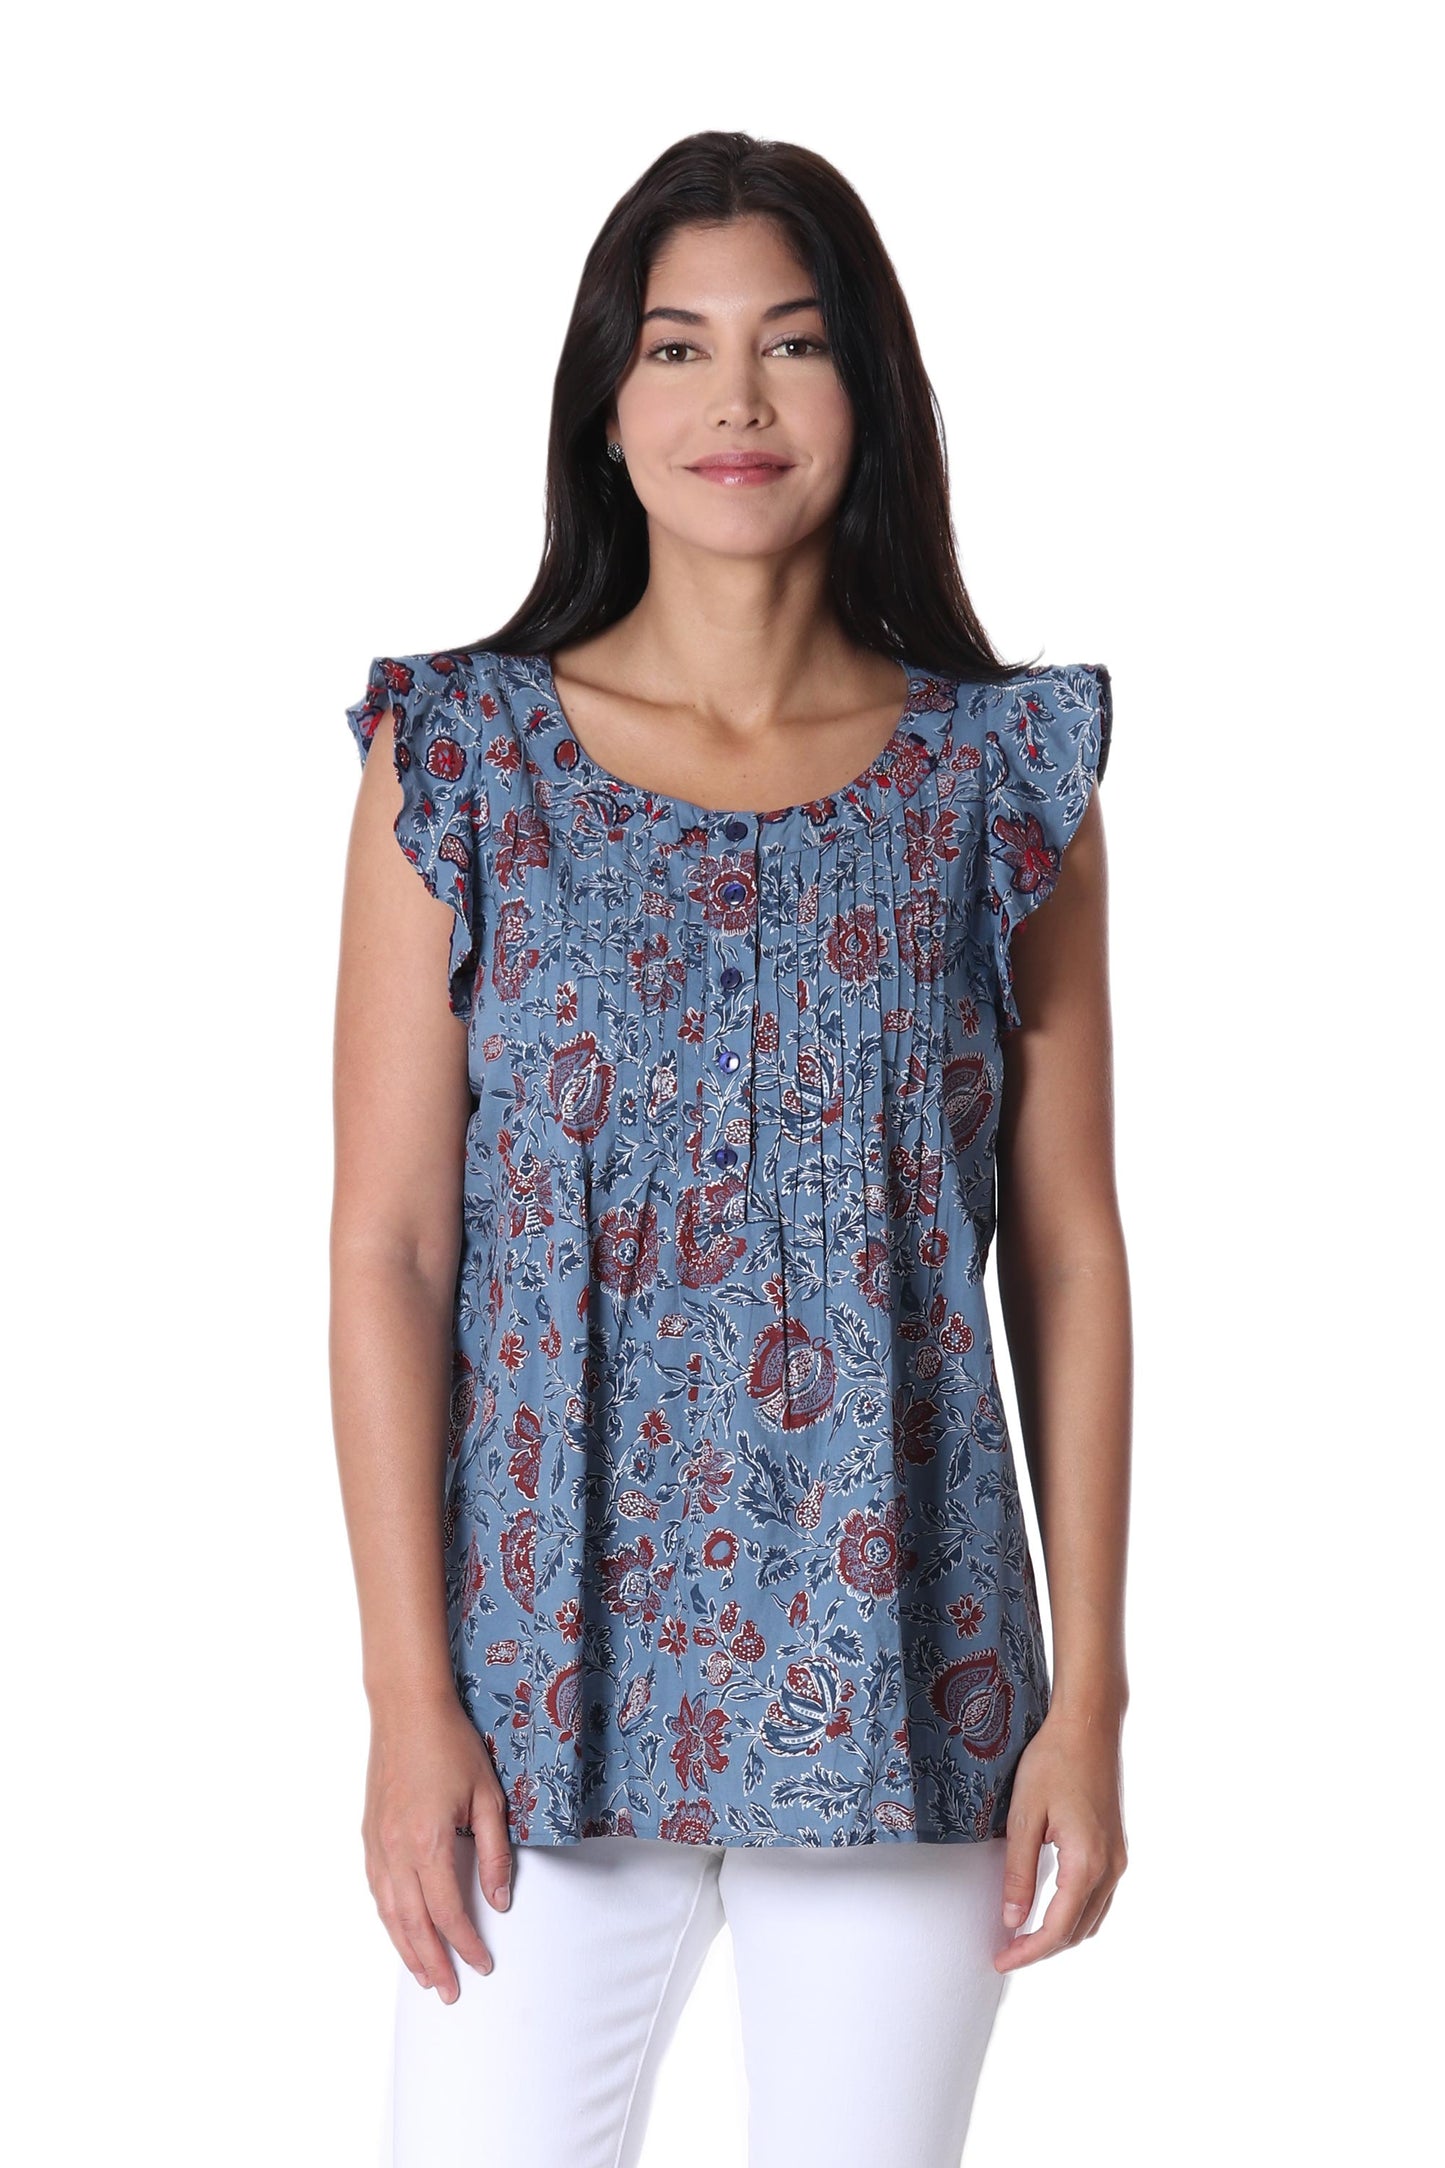 Garden Bliss Floral Printed Cotton Blouse in Cerulean from India